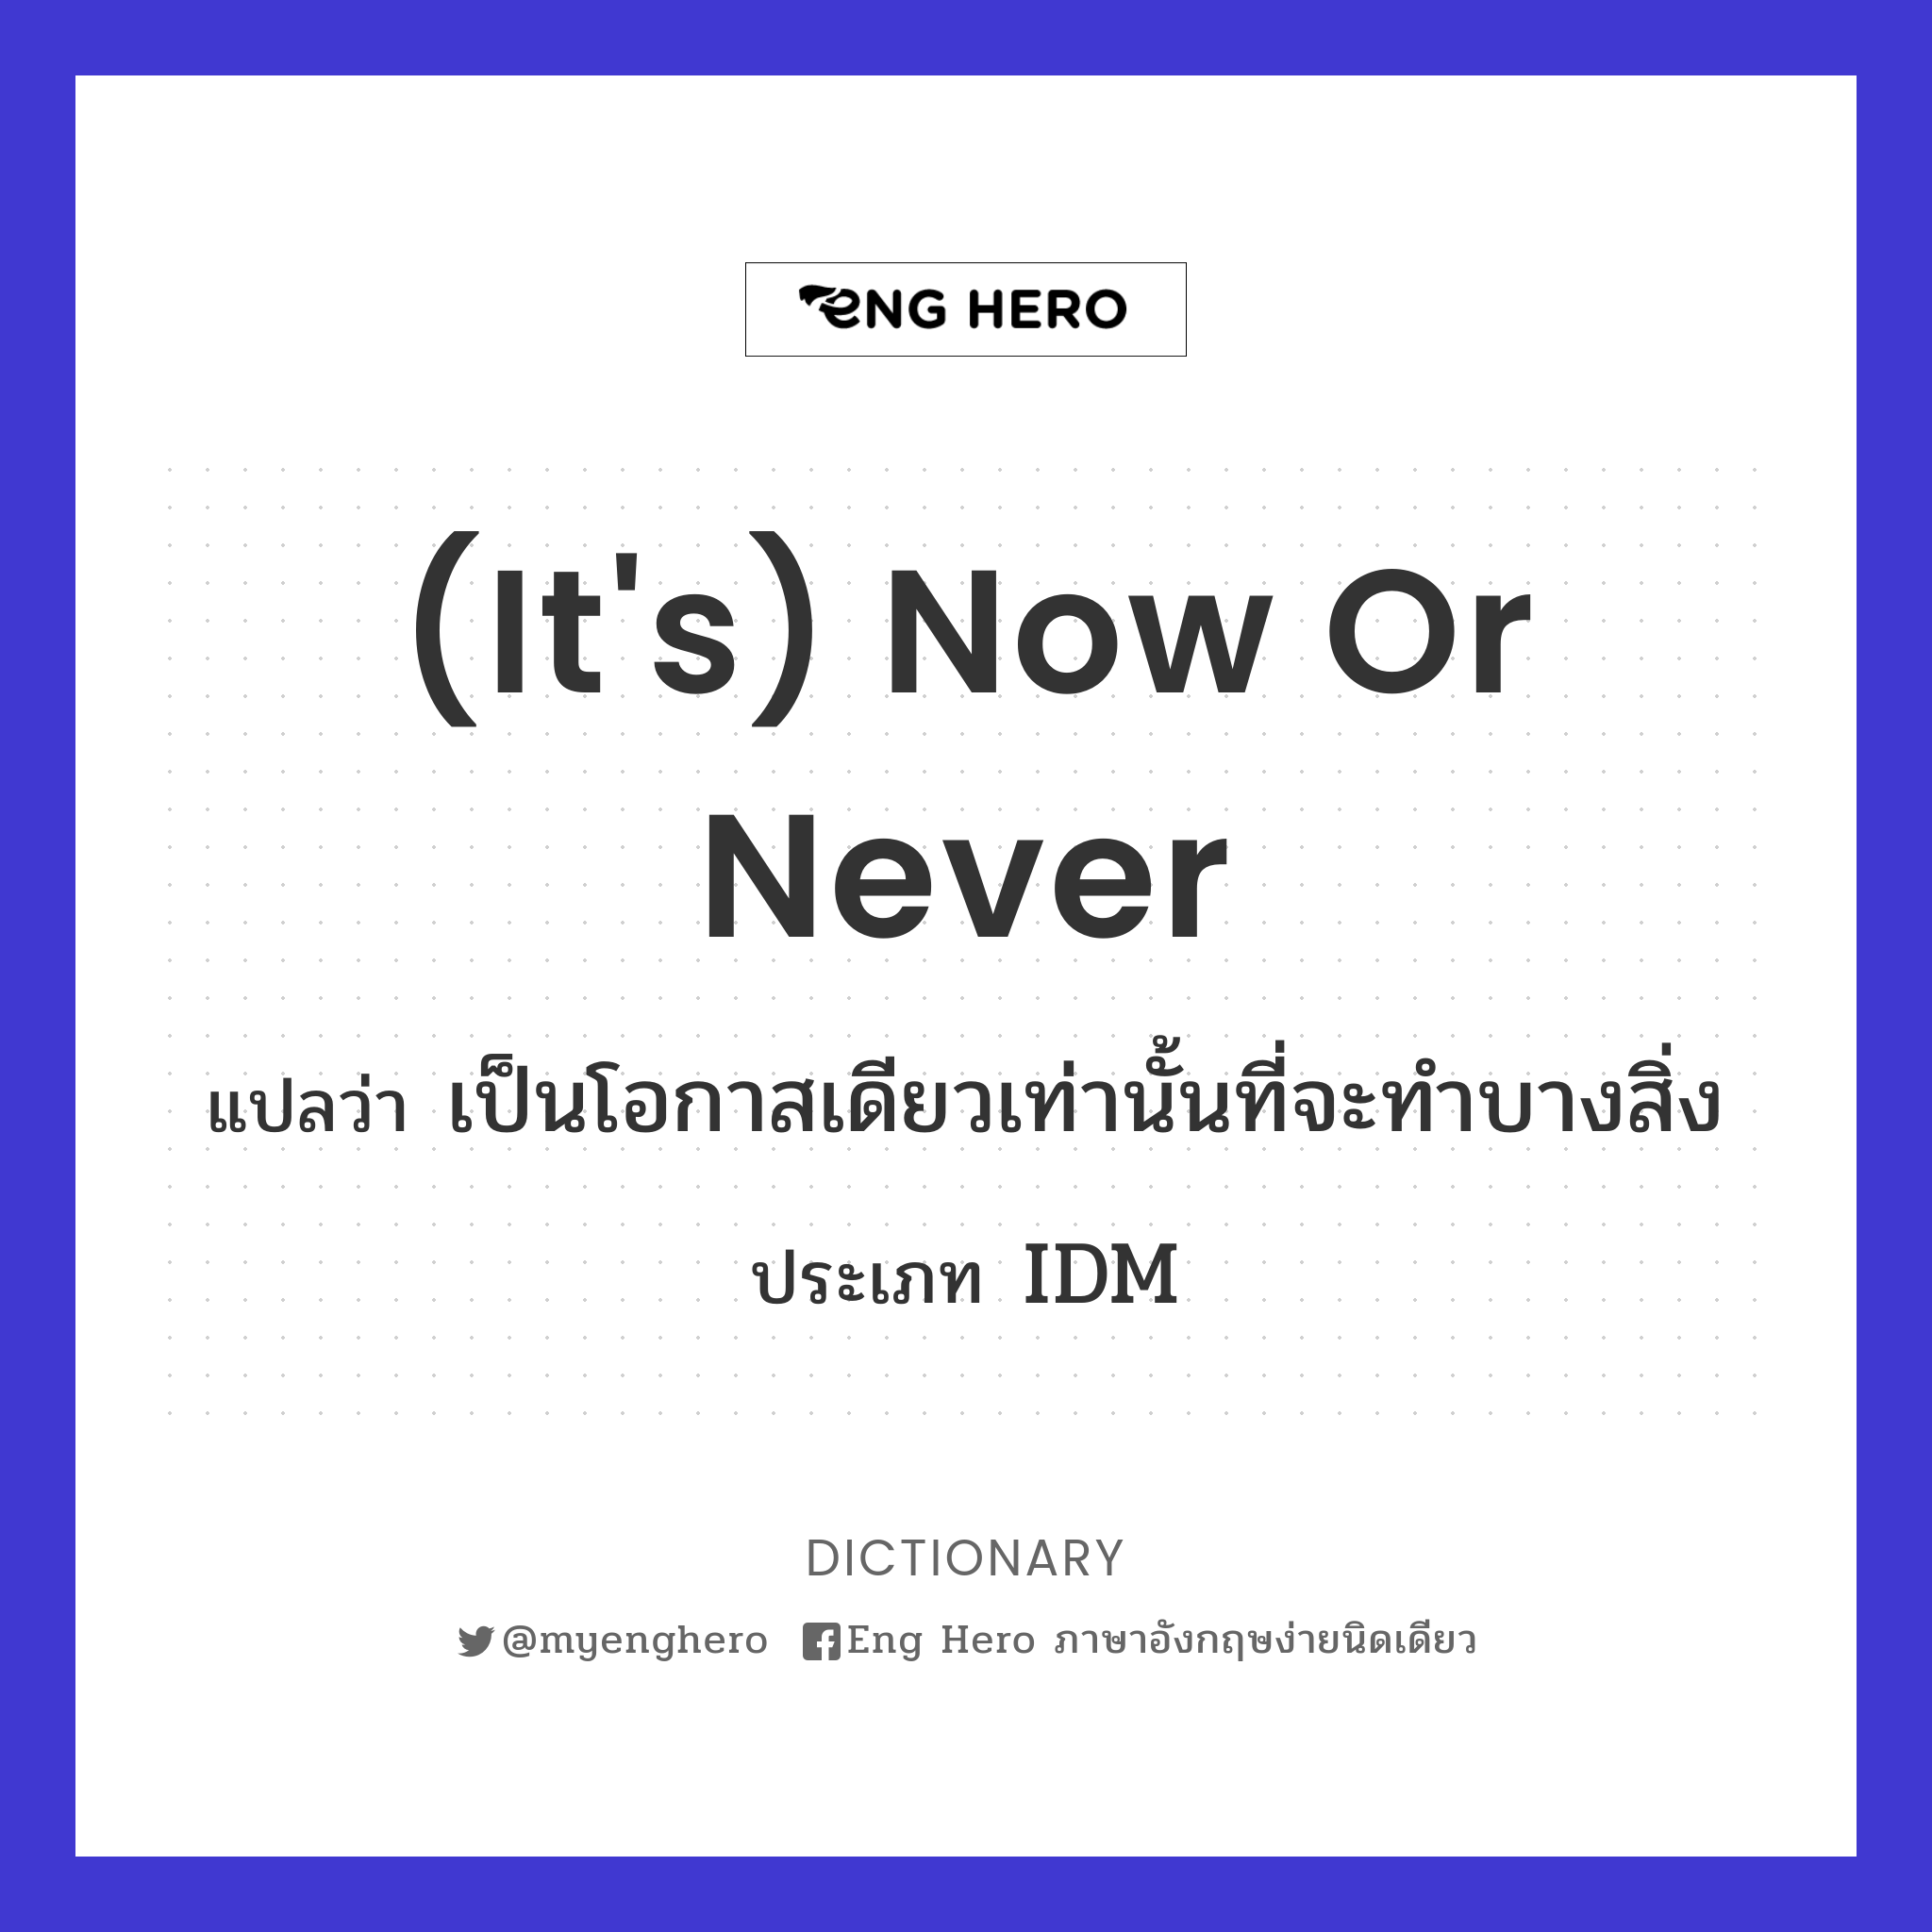 (it's) now or never